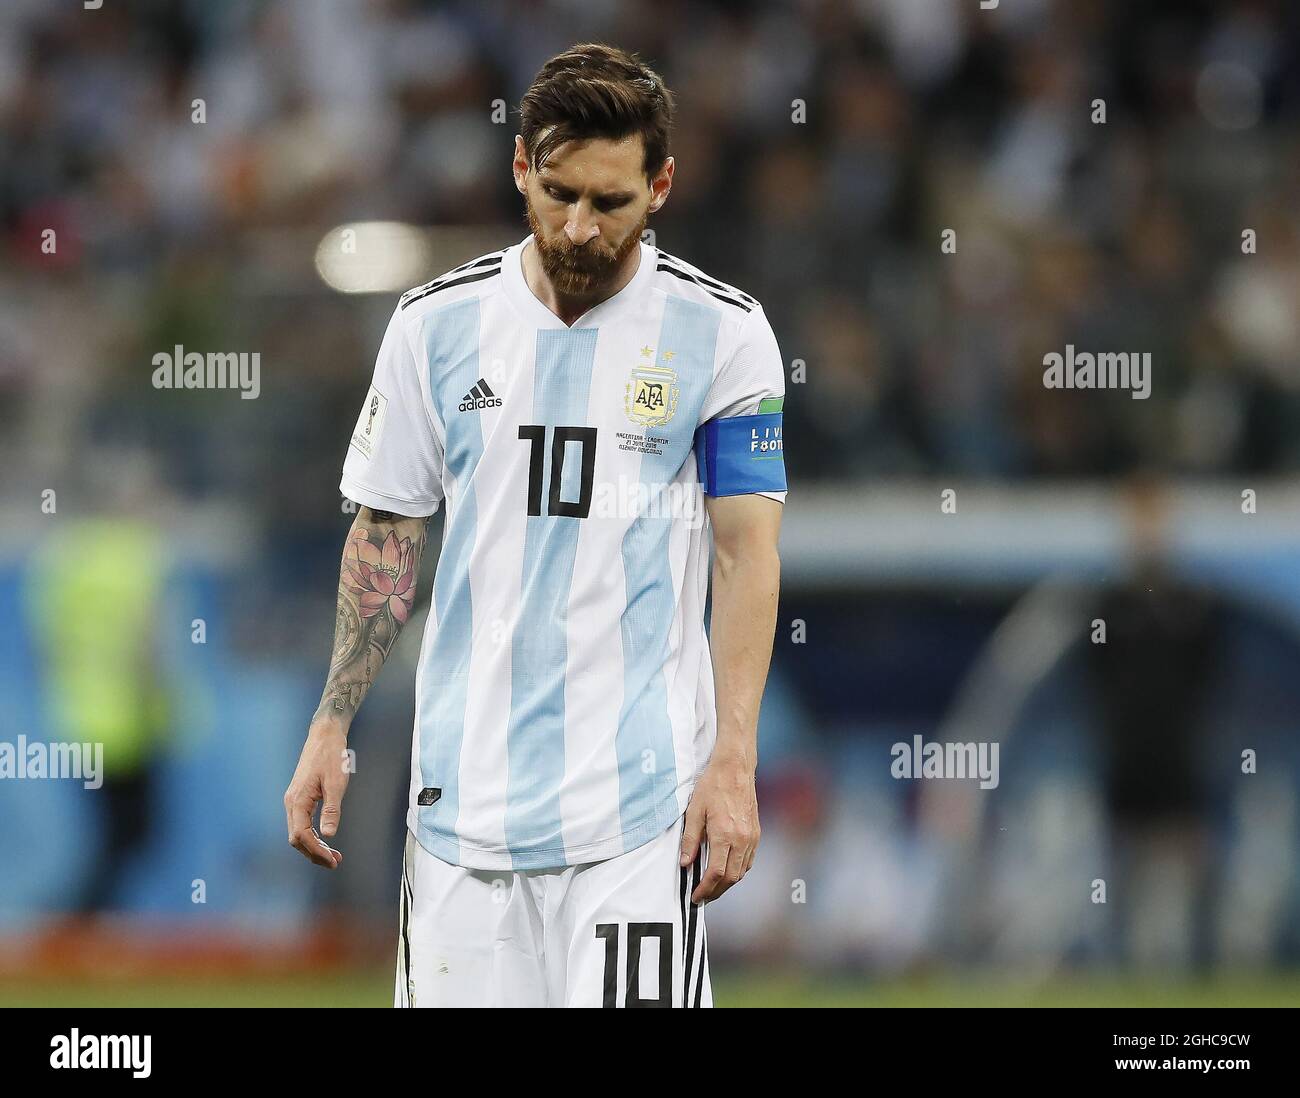 Lionel Messi of Argentina dejected following Croatia's second goal during the FIFA World Cup 2018 Group D match at the Nizhny Novgorod Stadium, Nizhny Novgorod. Picture date 21st June 2018. Picture credit should read: David Klein/Sportimage via PA Images Stock Photo